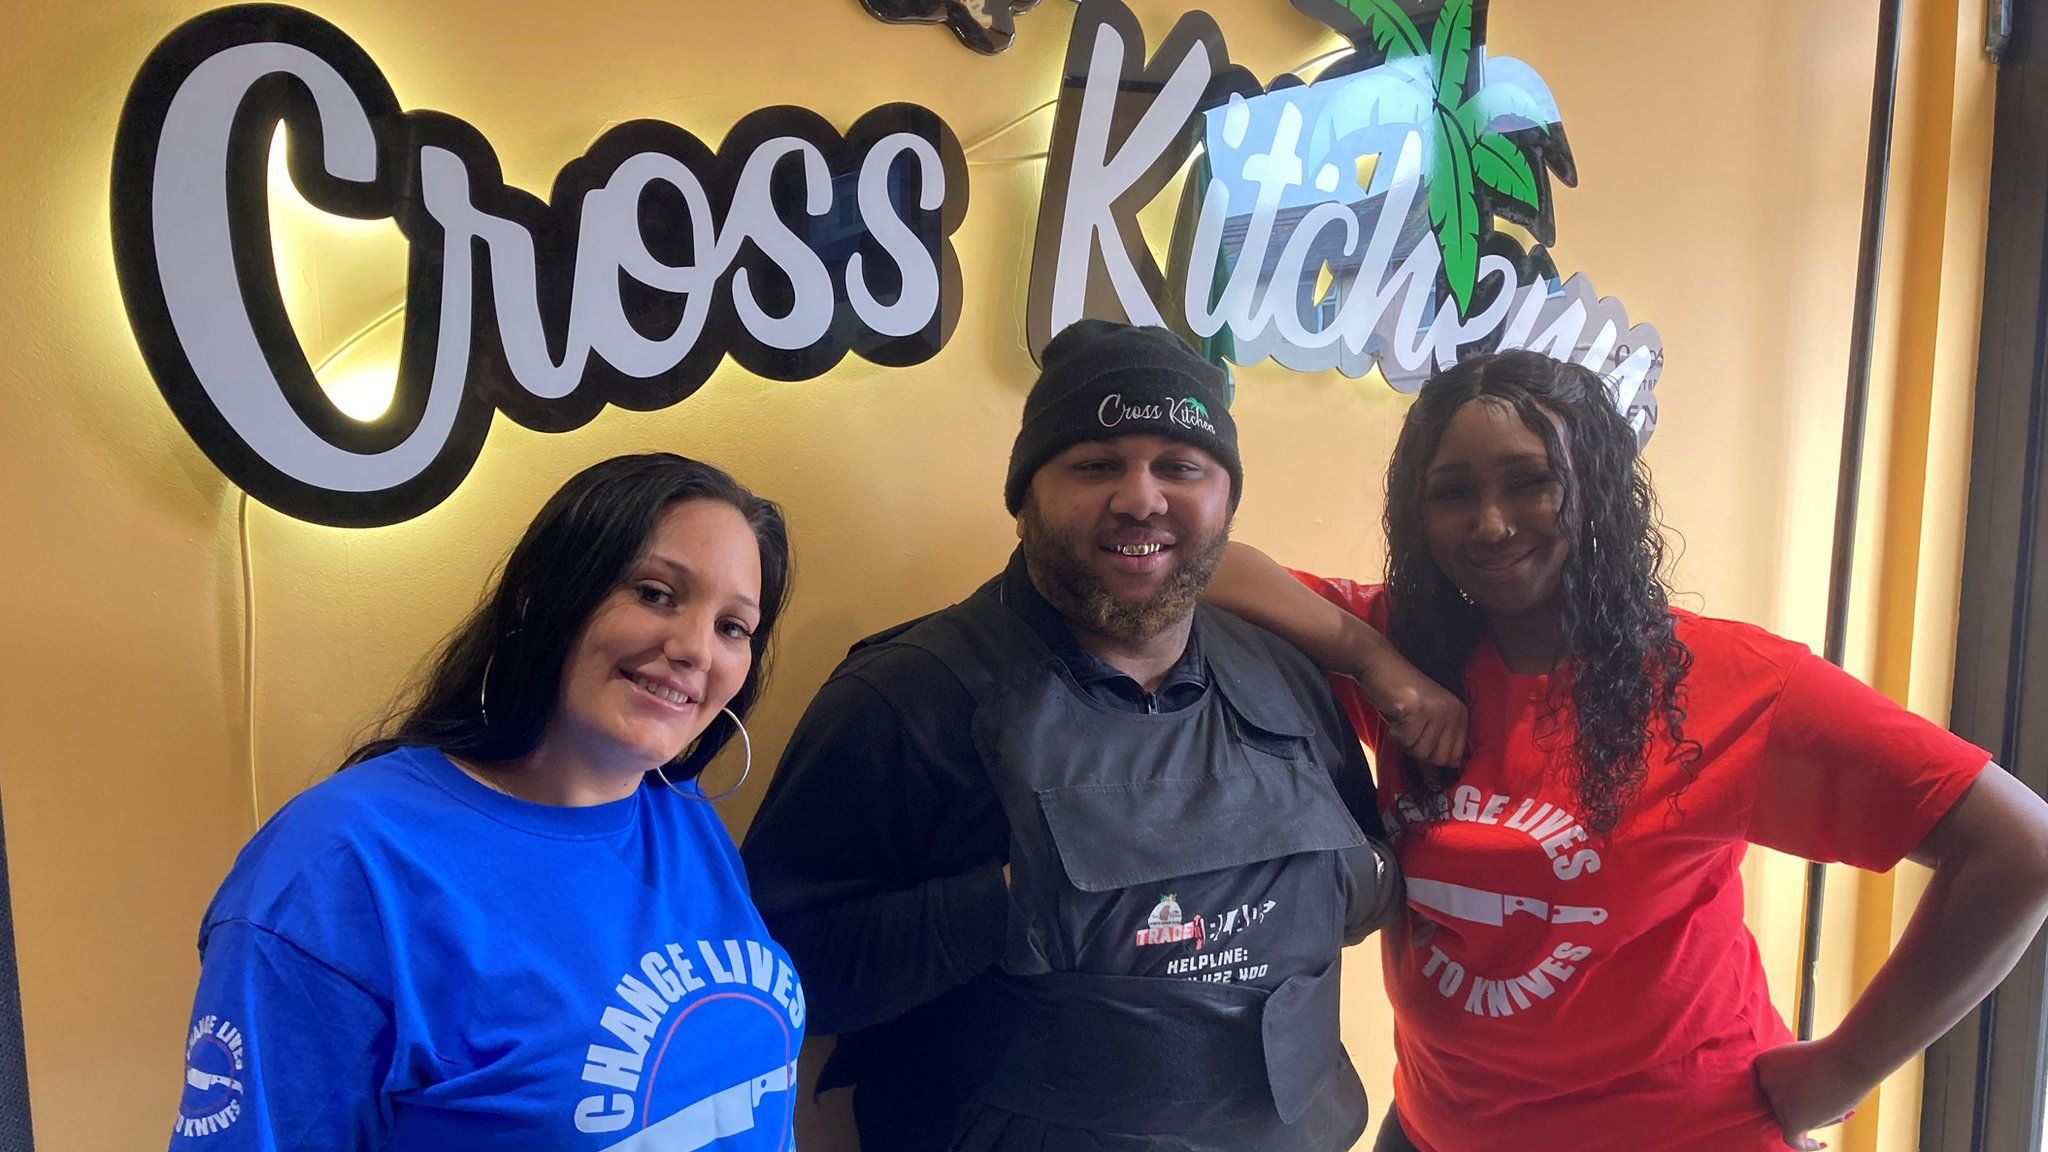 Cross Kitchenn and Trade The Blade founder Odane Cross with Ambassadors Jordan Turner to his left and Danyelle King on his right from the charity Change Lives No To Knives